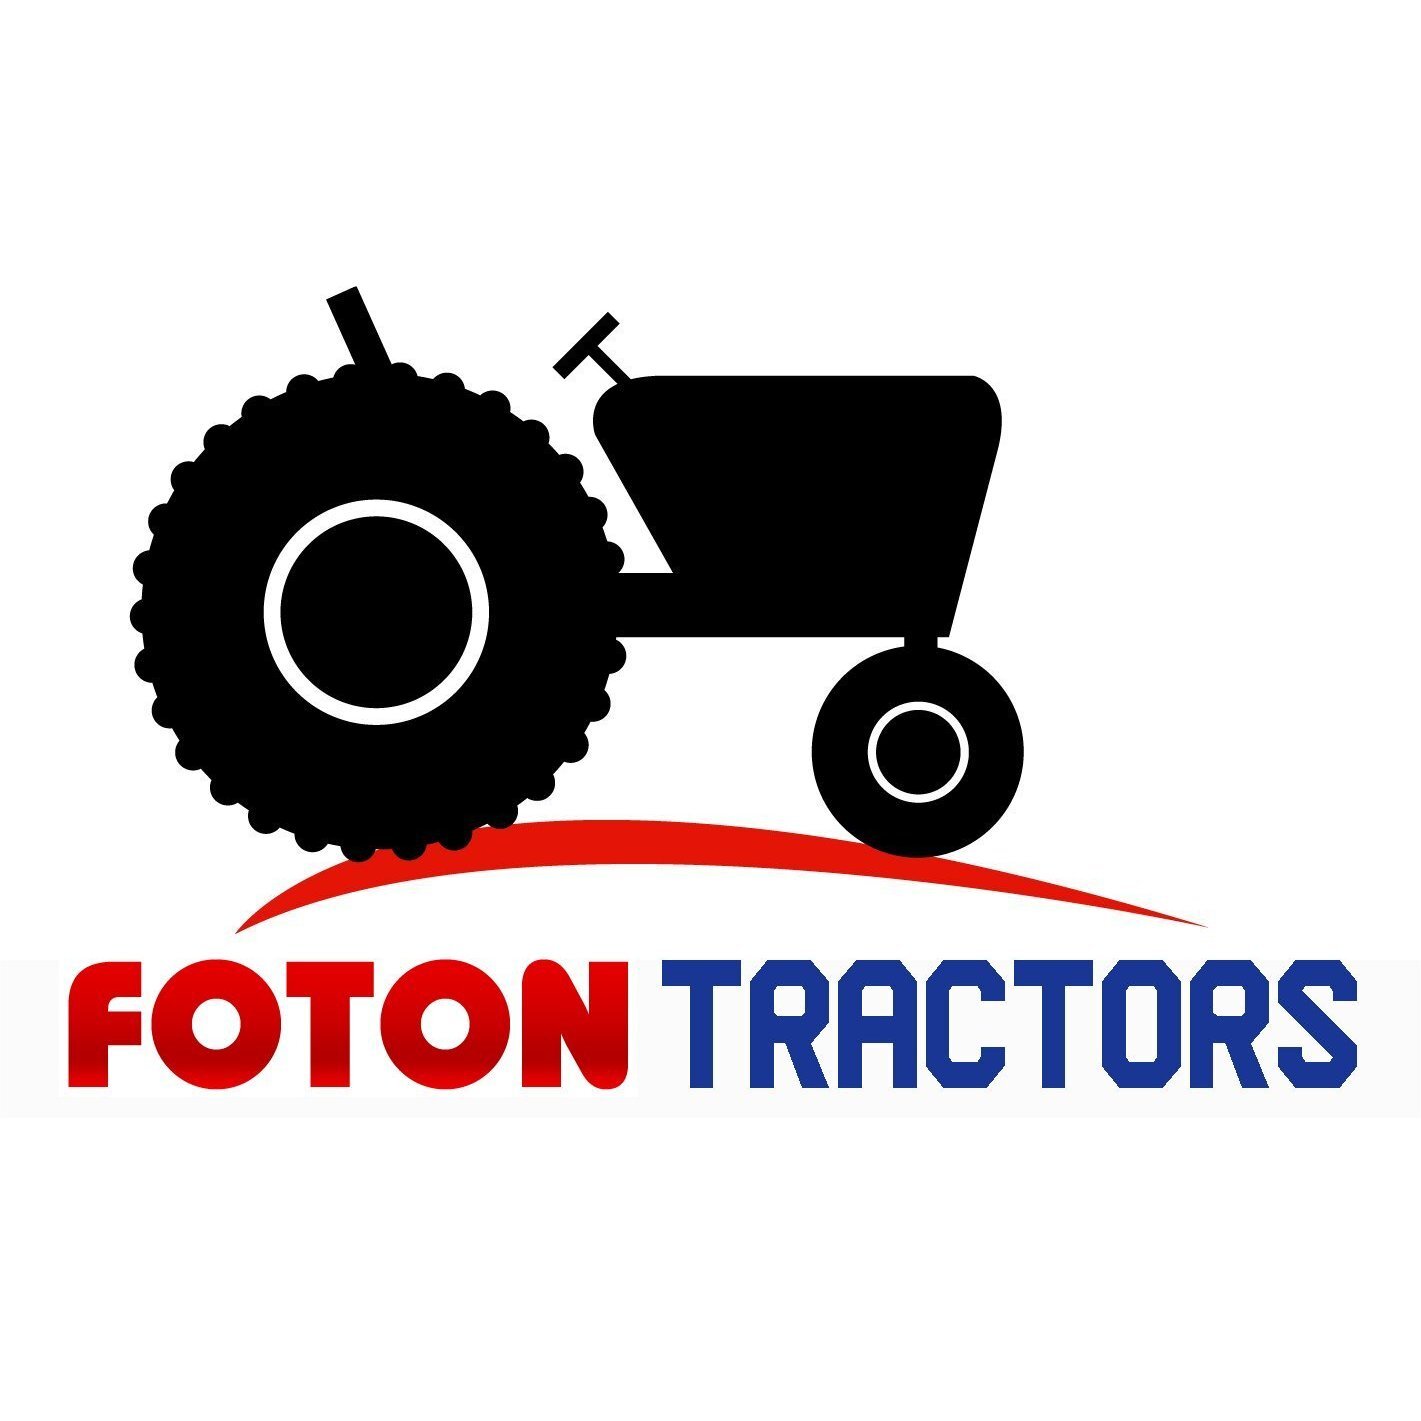 Suppliers of Foton Compact Tractors, Attachments and Servicing